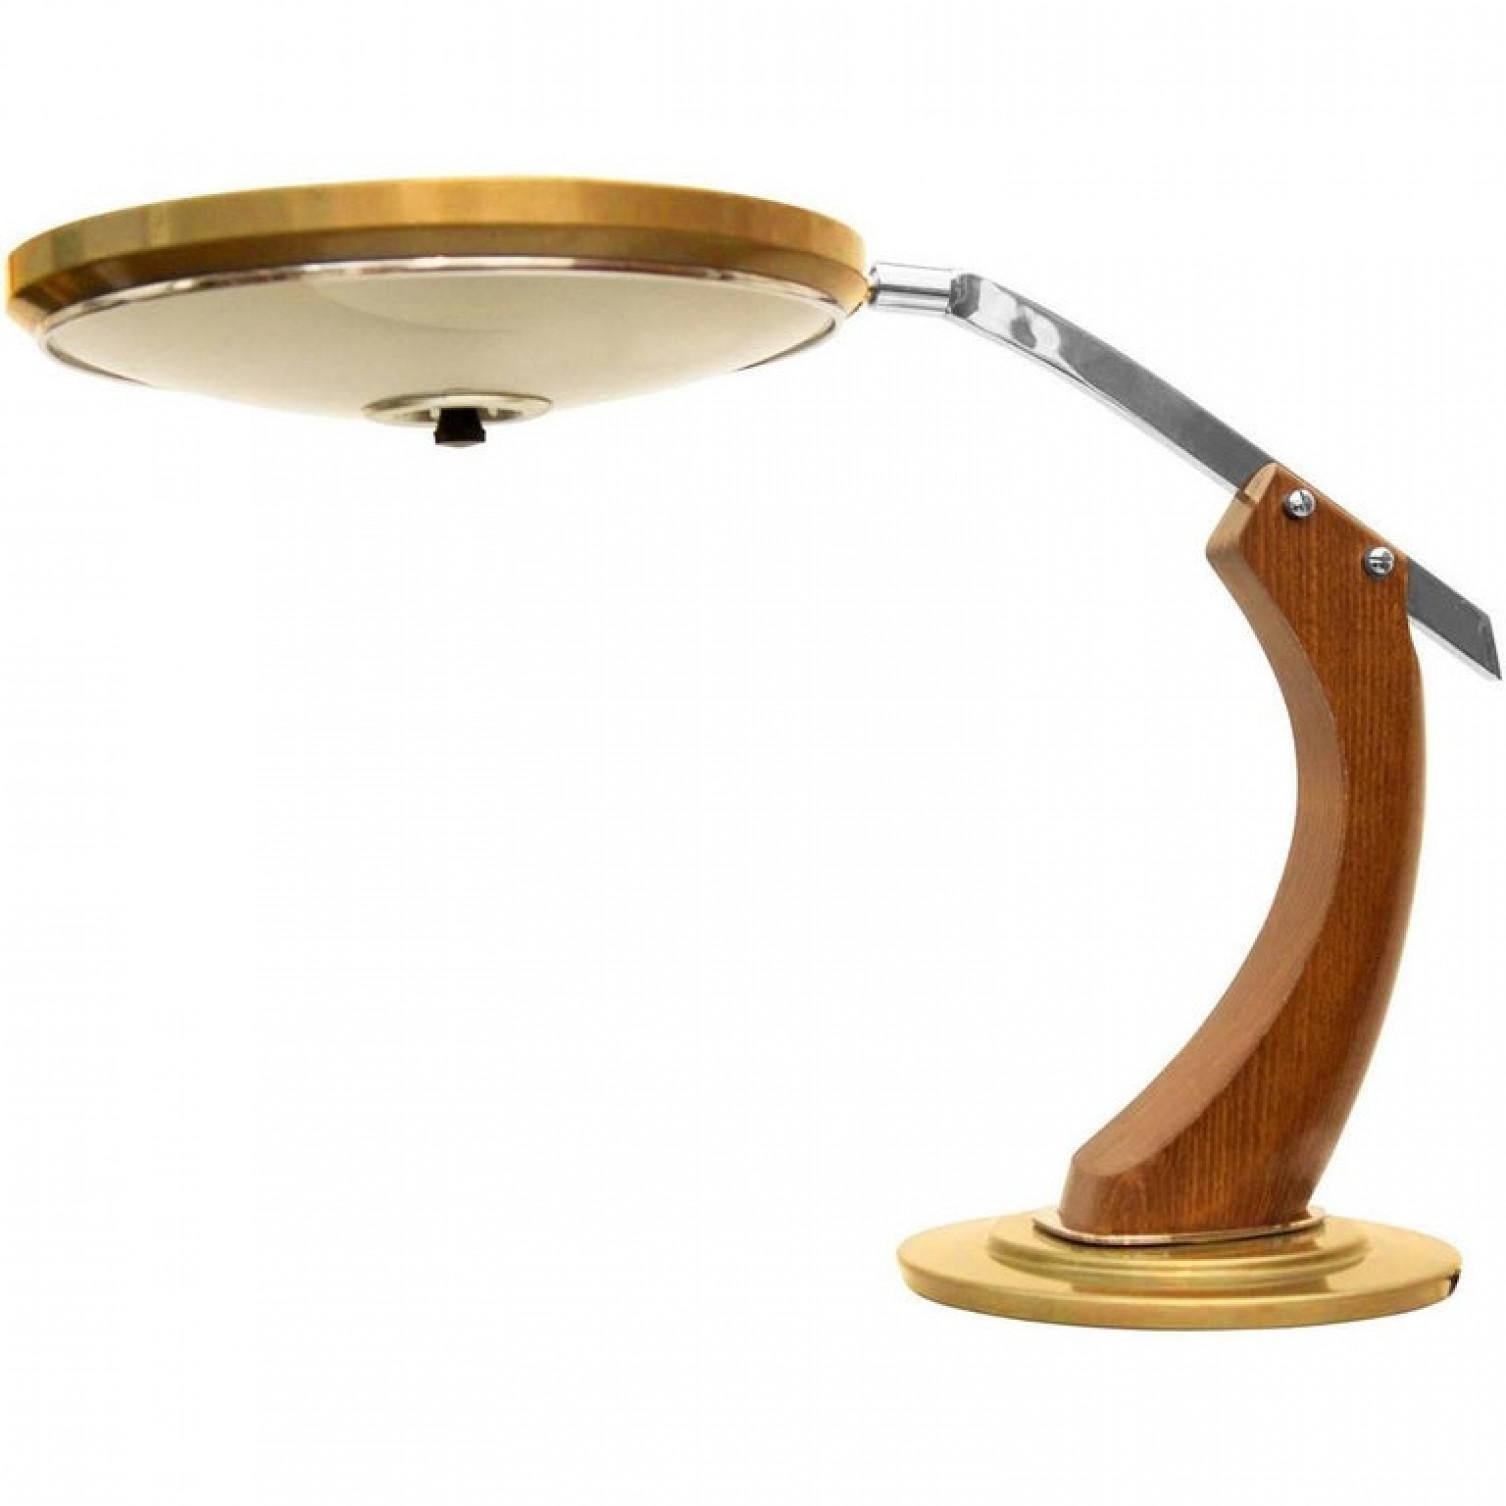 Fase Madrid Midcentury Oak and Gold Desk Lamp, 1960s (Copy) In Good Condition For Sale In Rijssen, NL